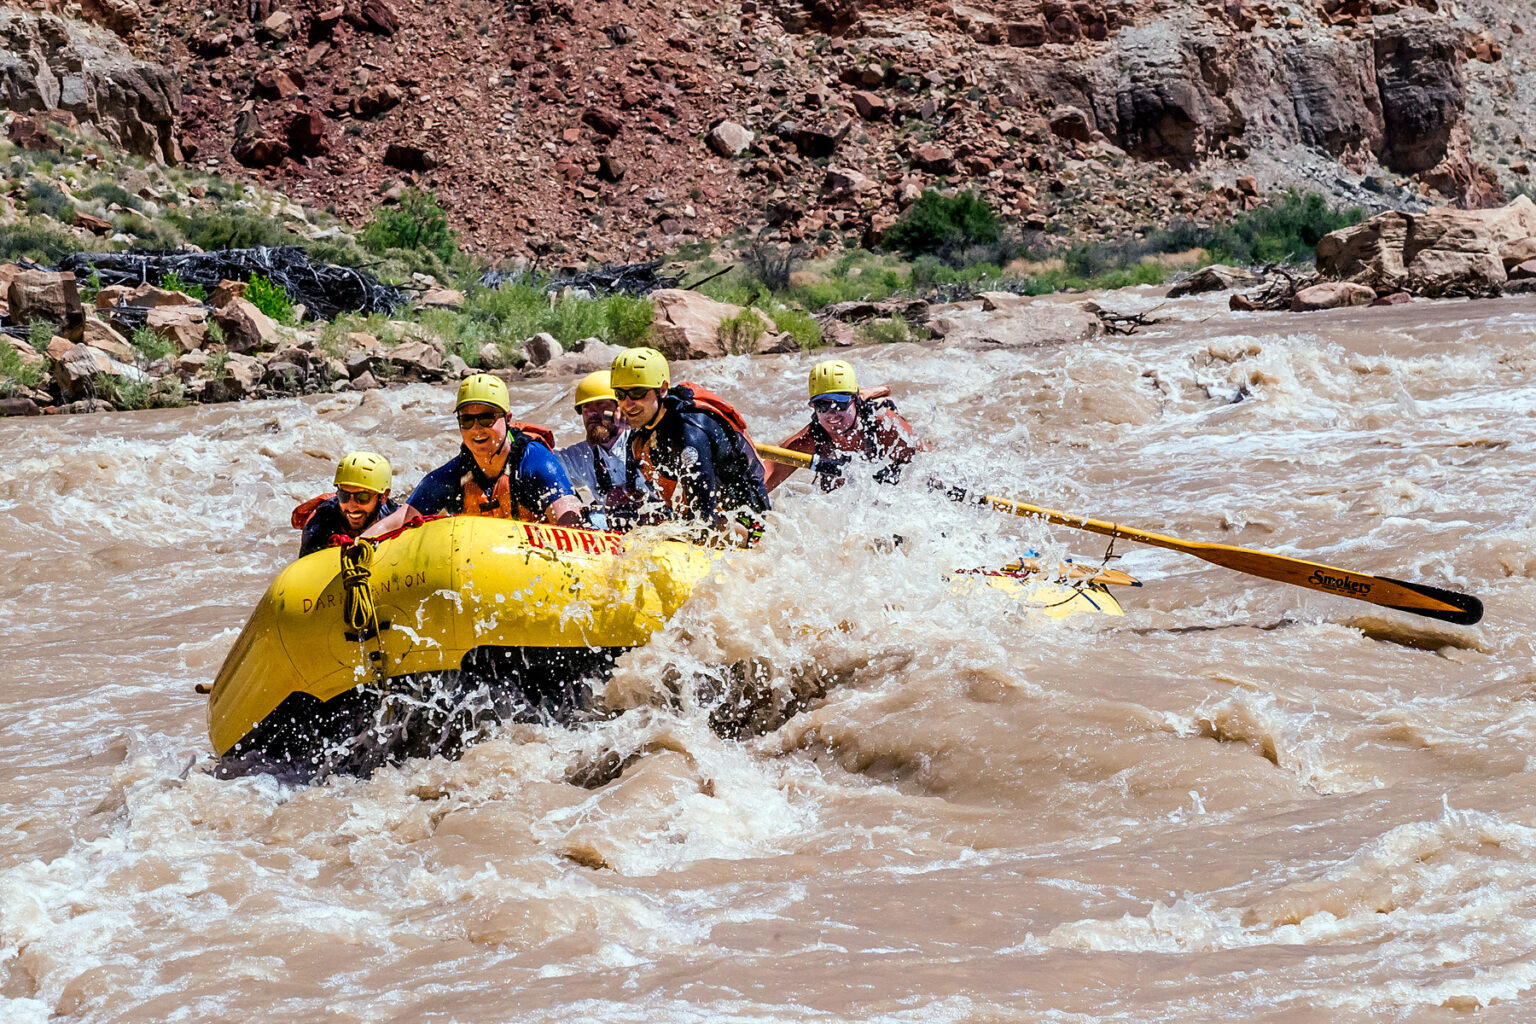 A yellow raft with guests takes on the rapids of Cataract Canyon on the Colorado River